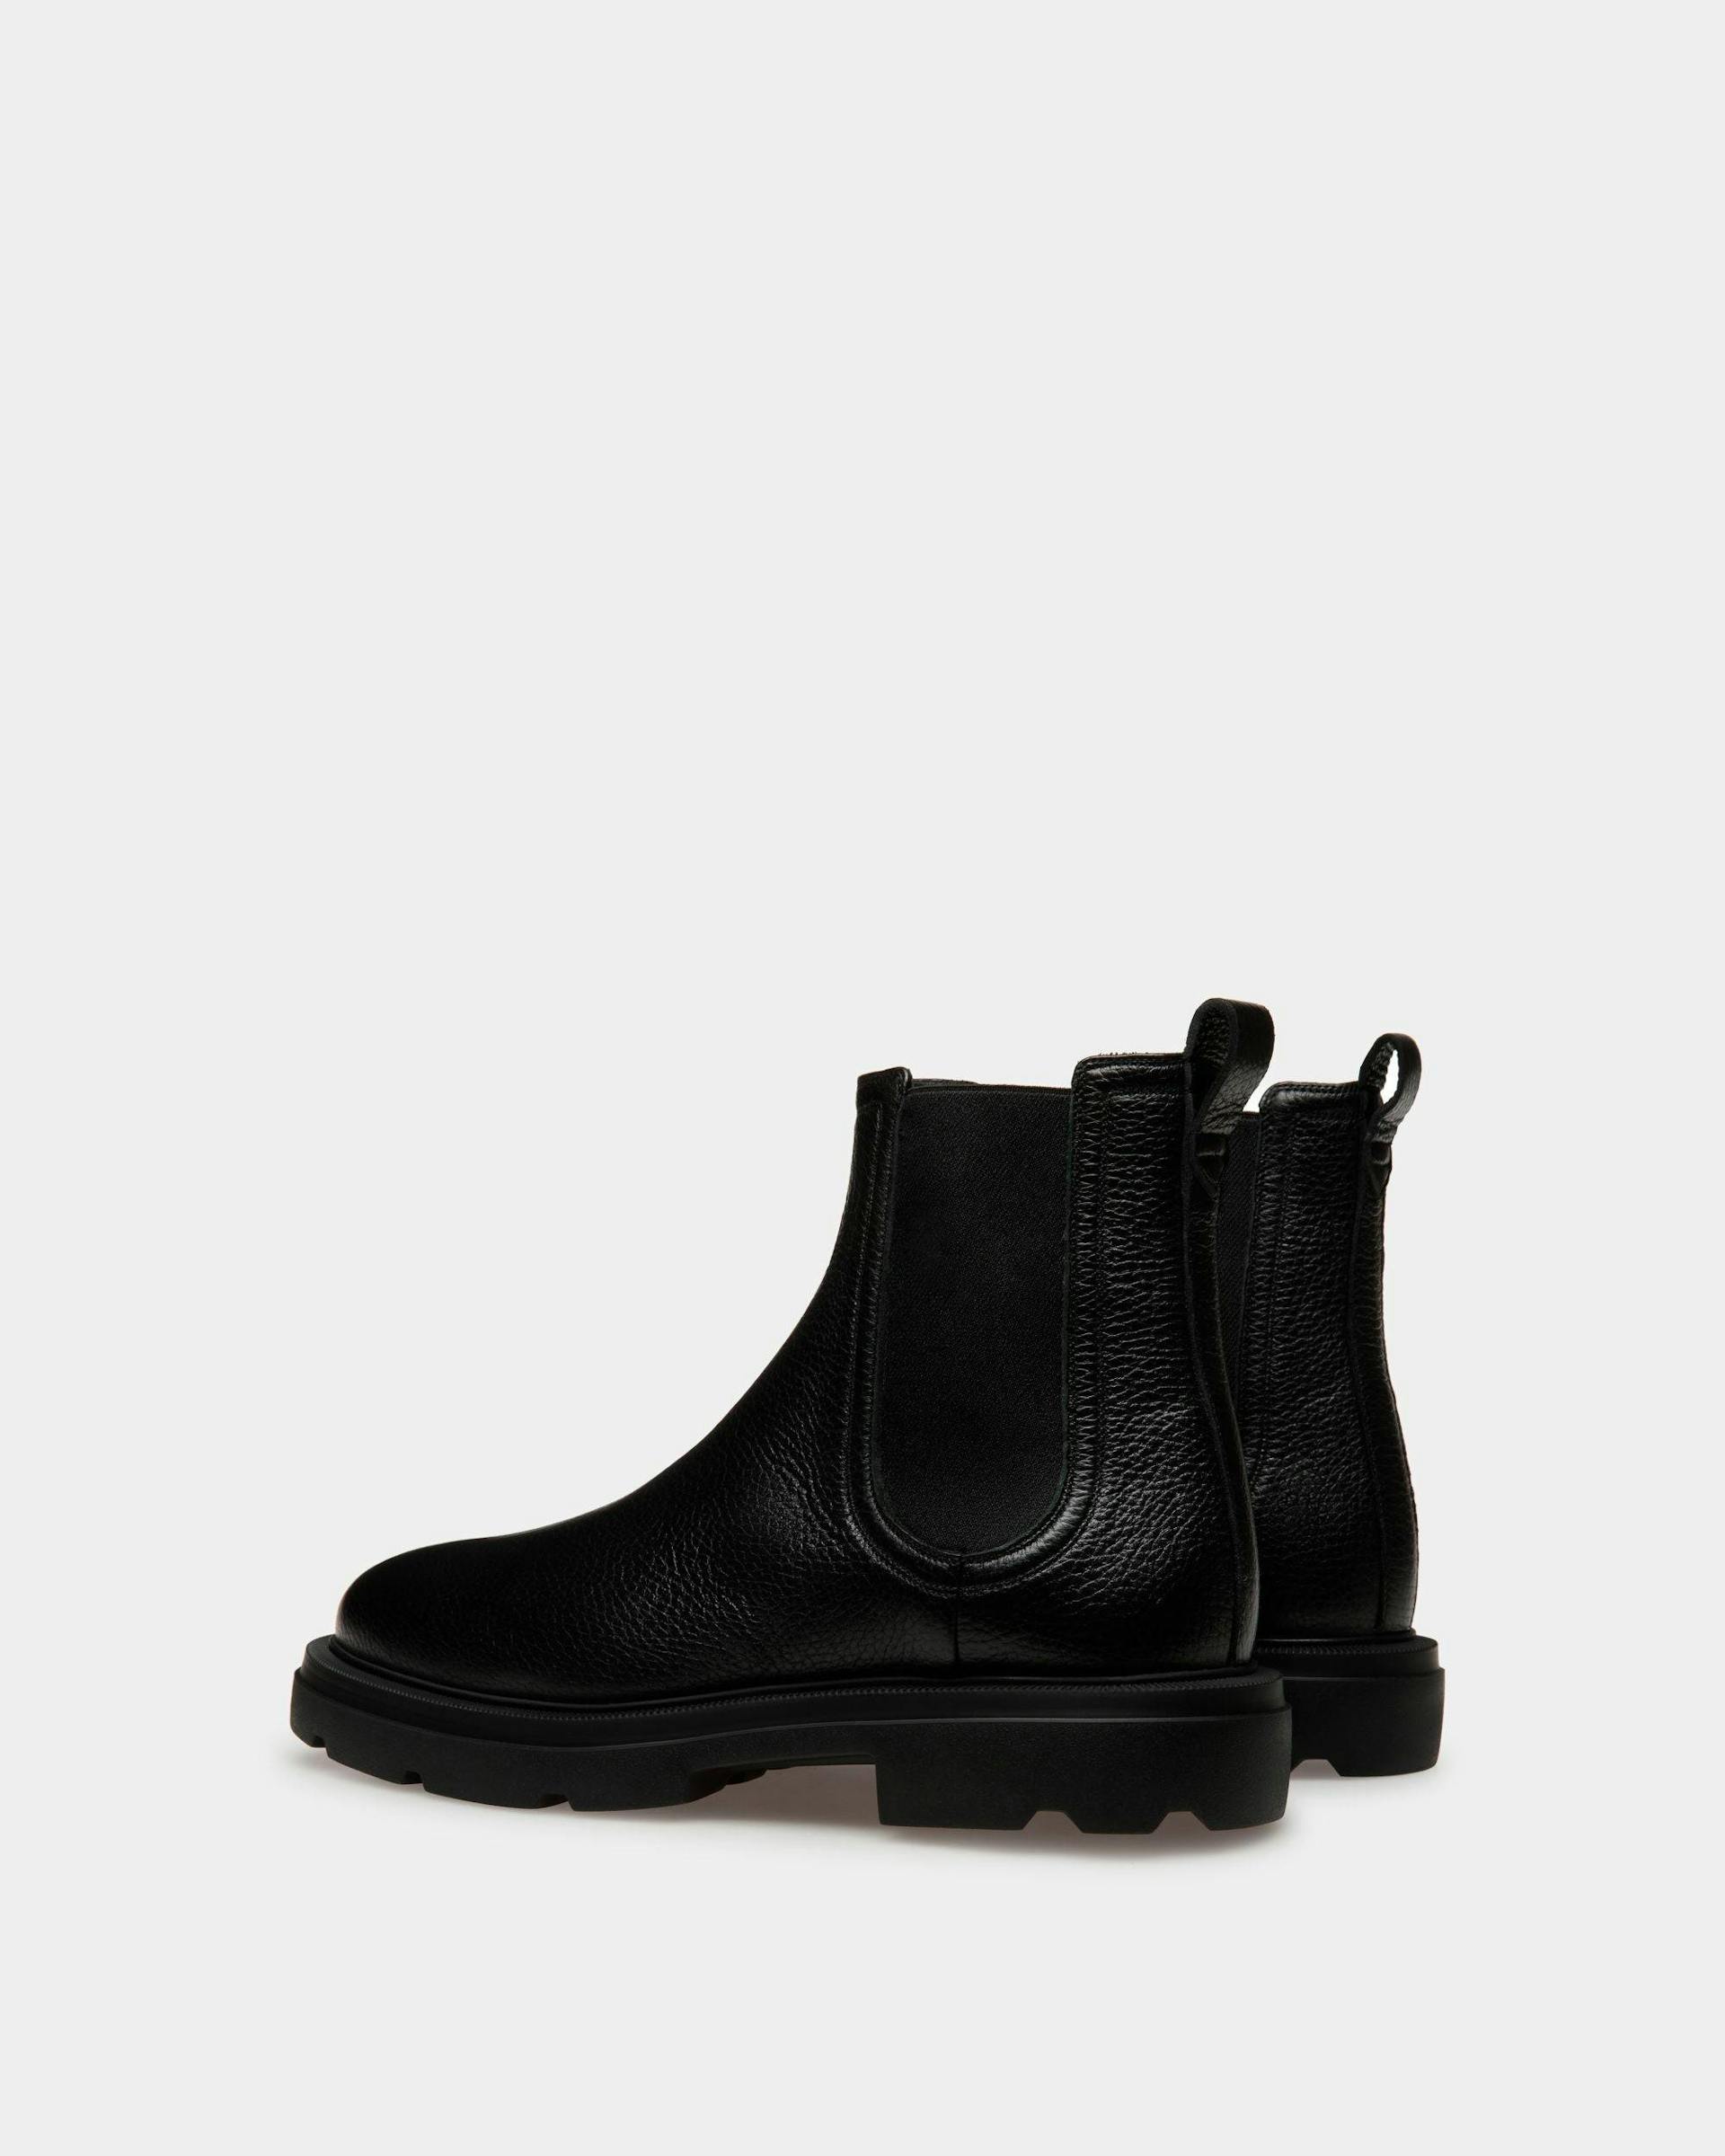 Men's Zurich Booties In Black Leather | Bally | Still Life 3/4 Back